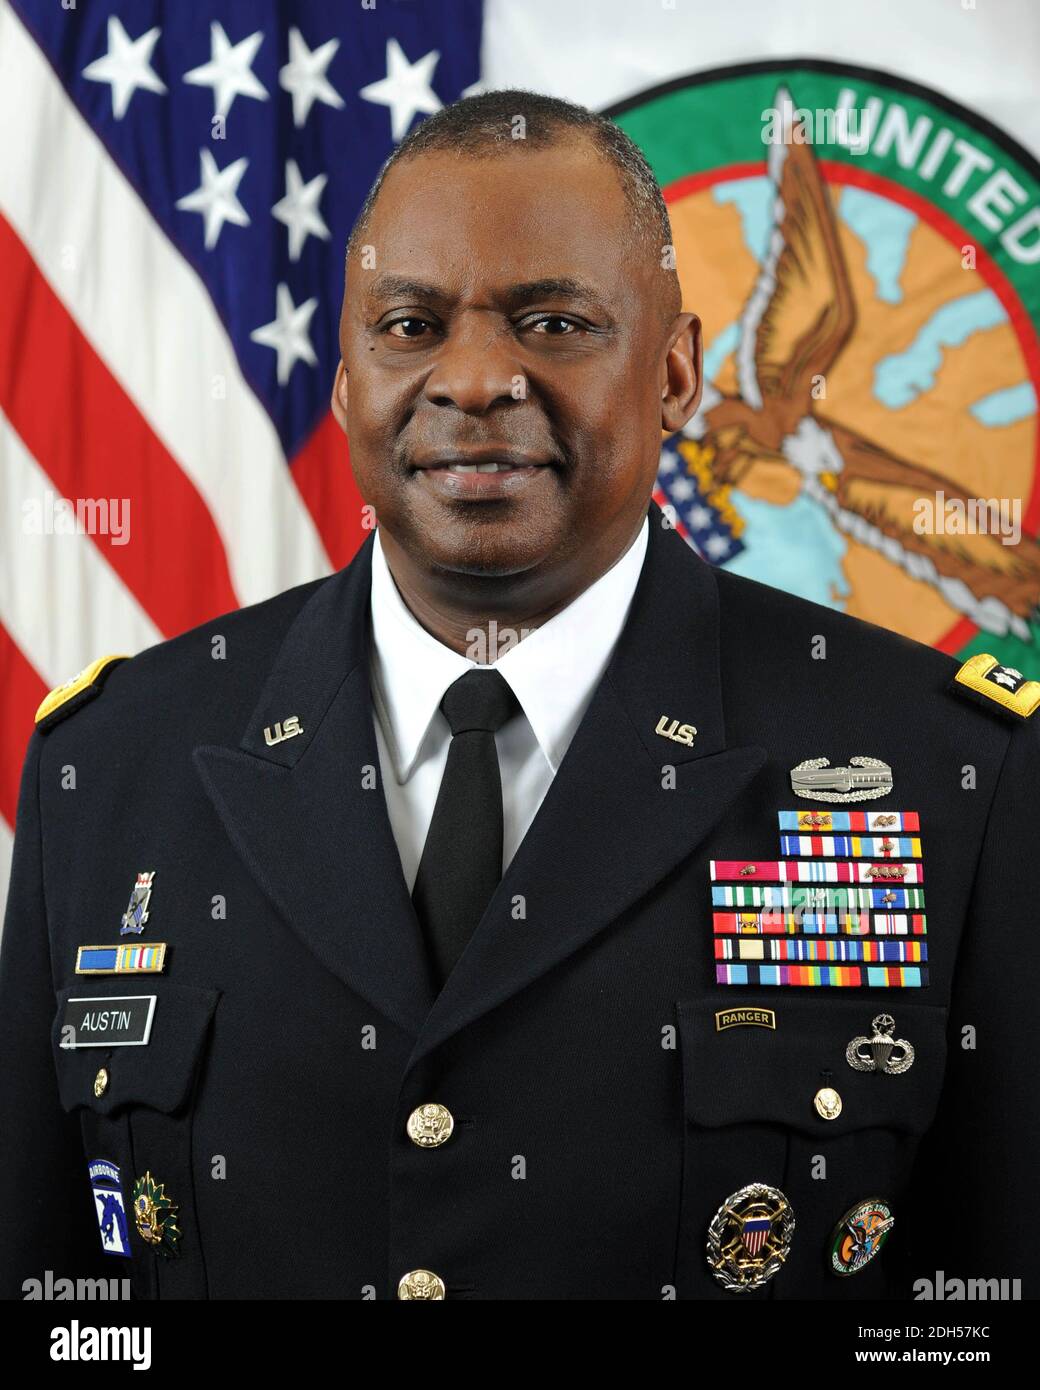 United States Army General Lloyd J. Austin III, Commander, U.S. Central Command, assumed his post on March 22, 2013. Mandatory Credit: Monica A. King/DoD via CNP /MediaPunch Stock Photo